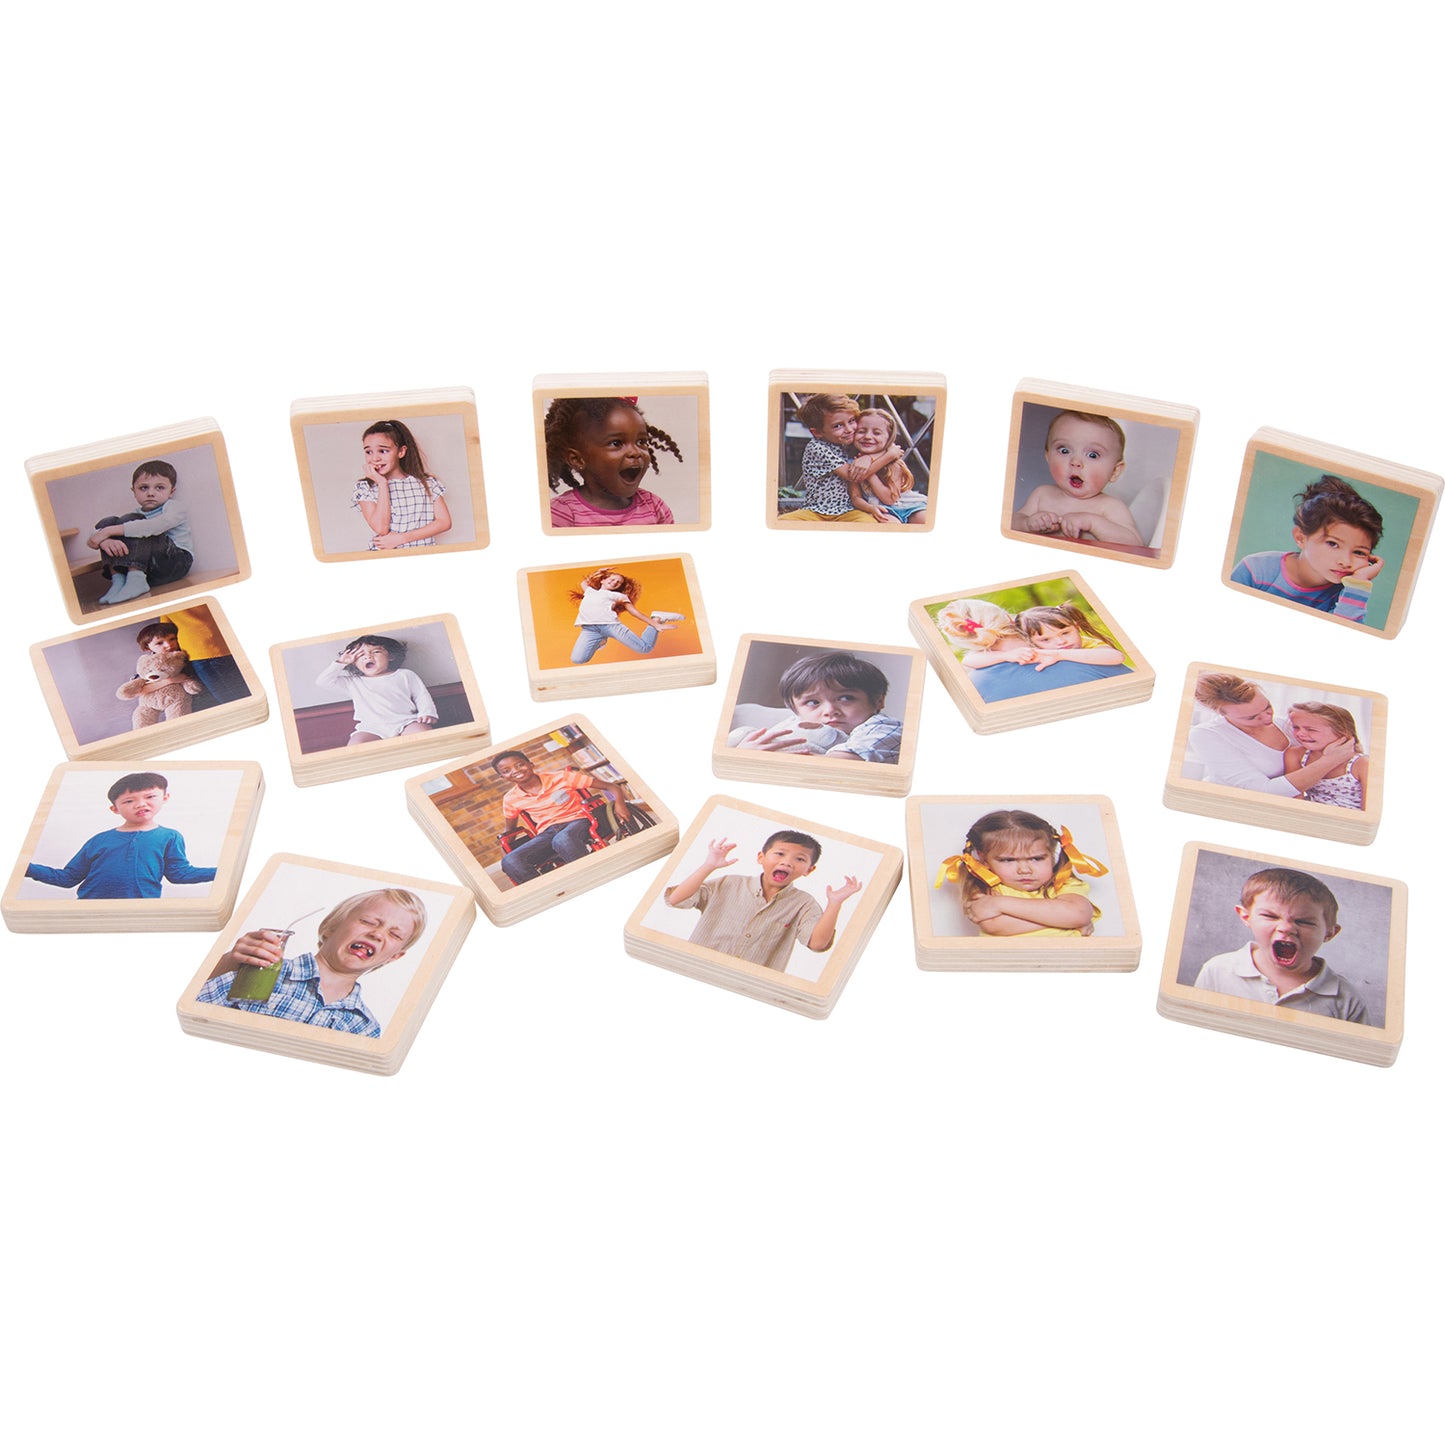 TickiT My Emotions Wooden Tiles - Educational Emotion Recognition Set - 18 Pieces